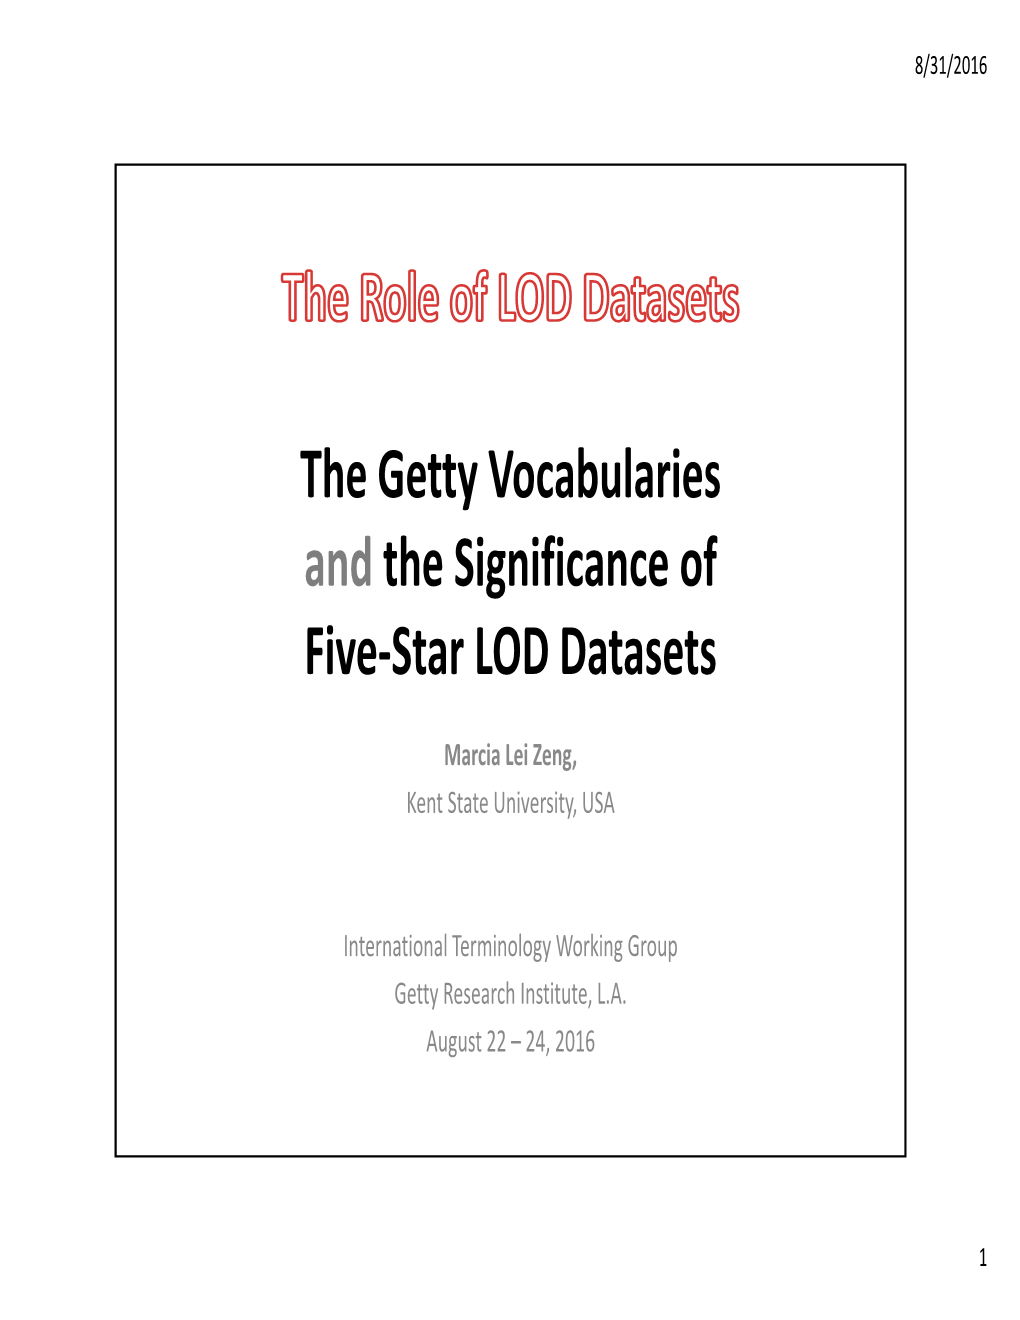 Getty Vocabularies As Five-Star LOD Datasets, Zeng, 2016